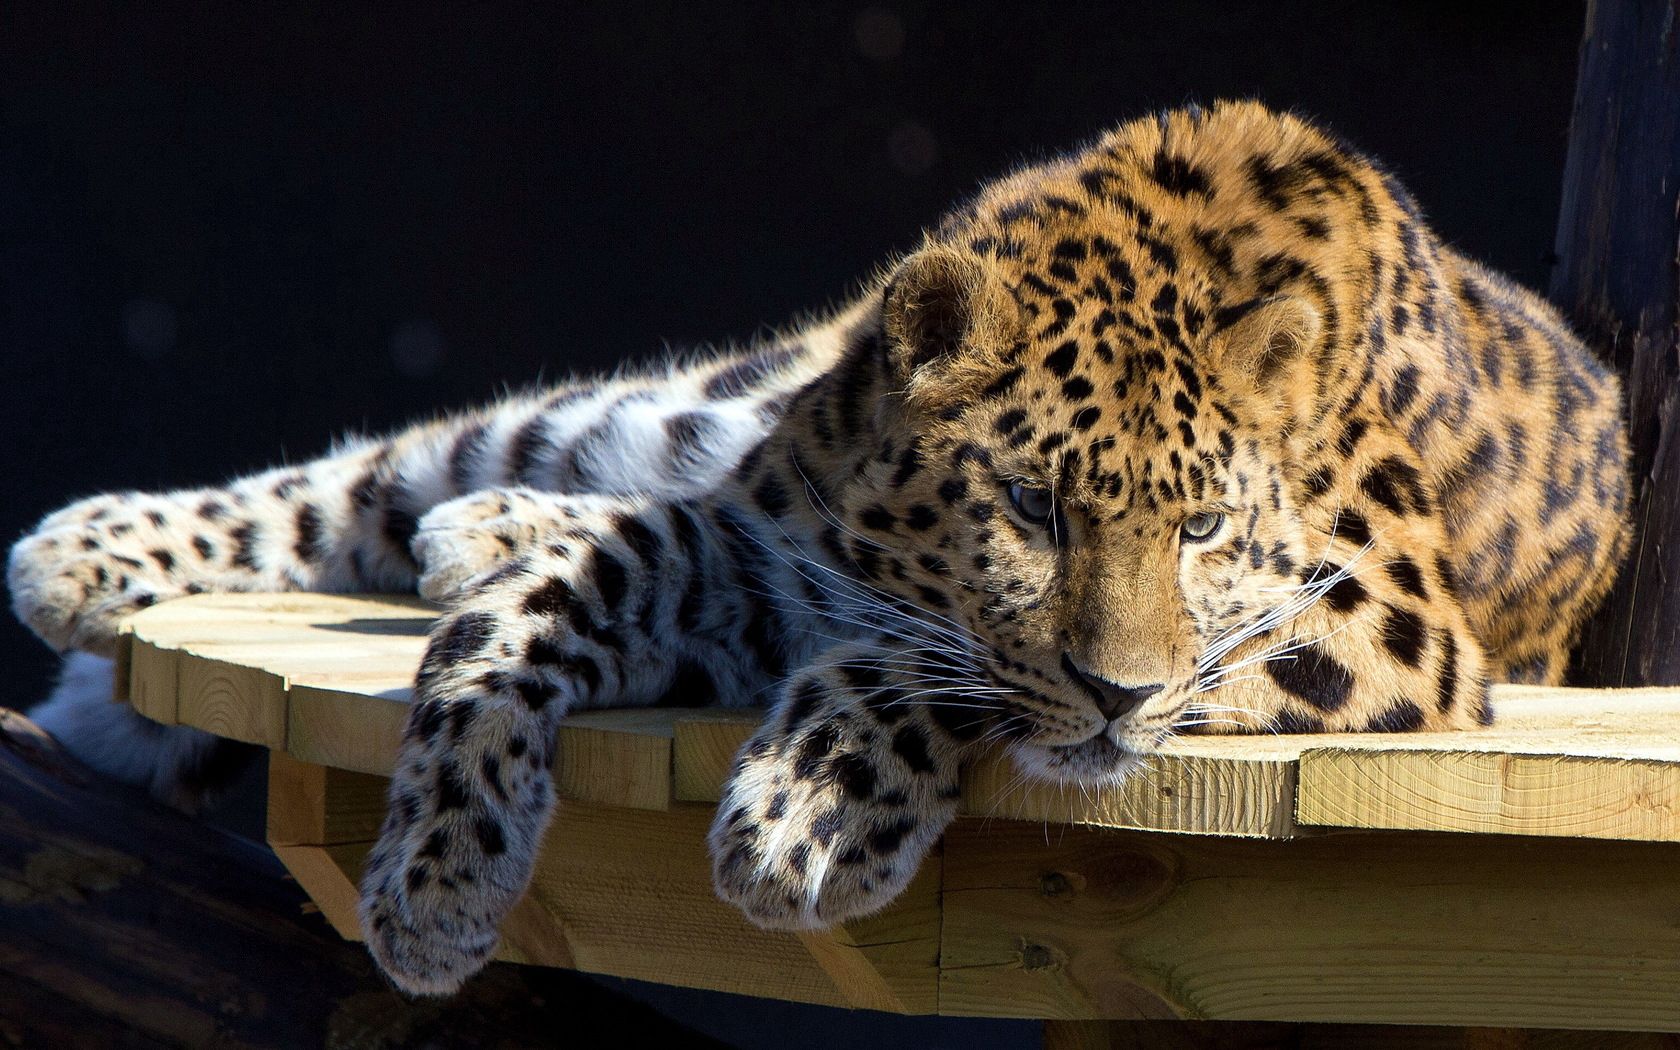 HD wallpaper to lie down, animals, leopard, lie, dog, muzzle, table, hunting, hunt, attention